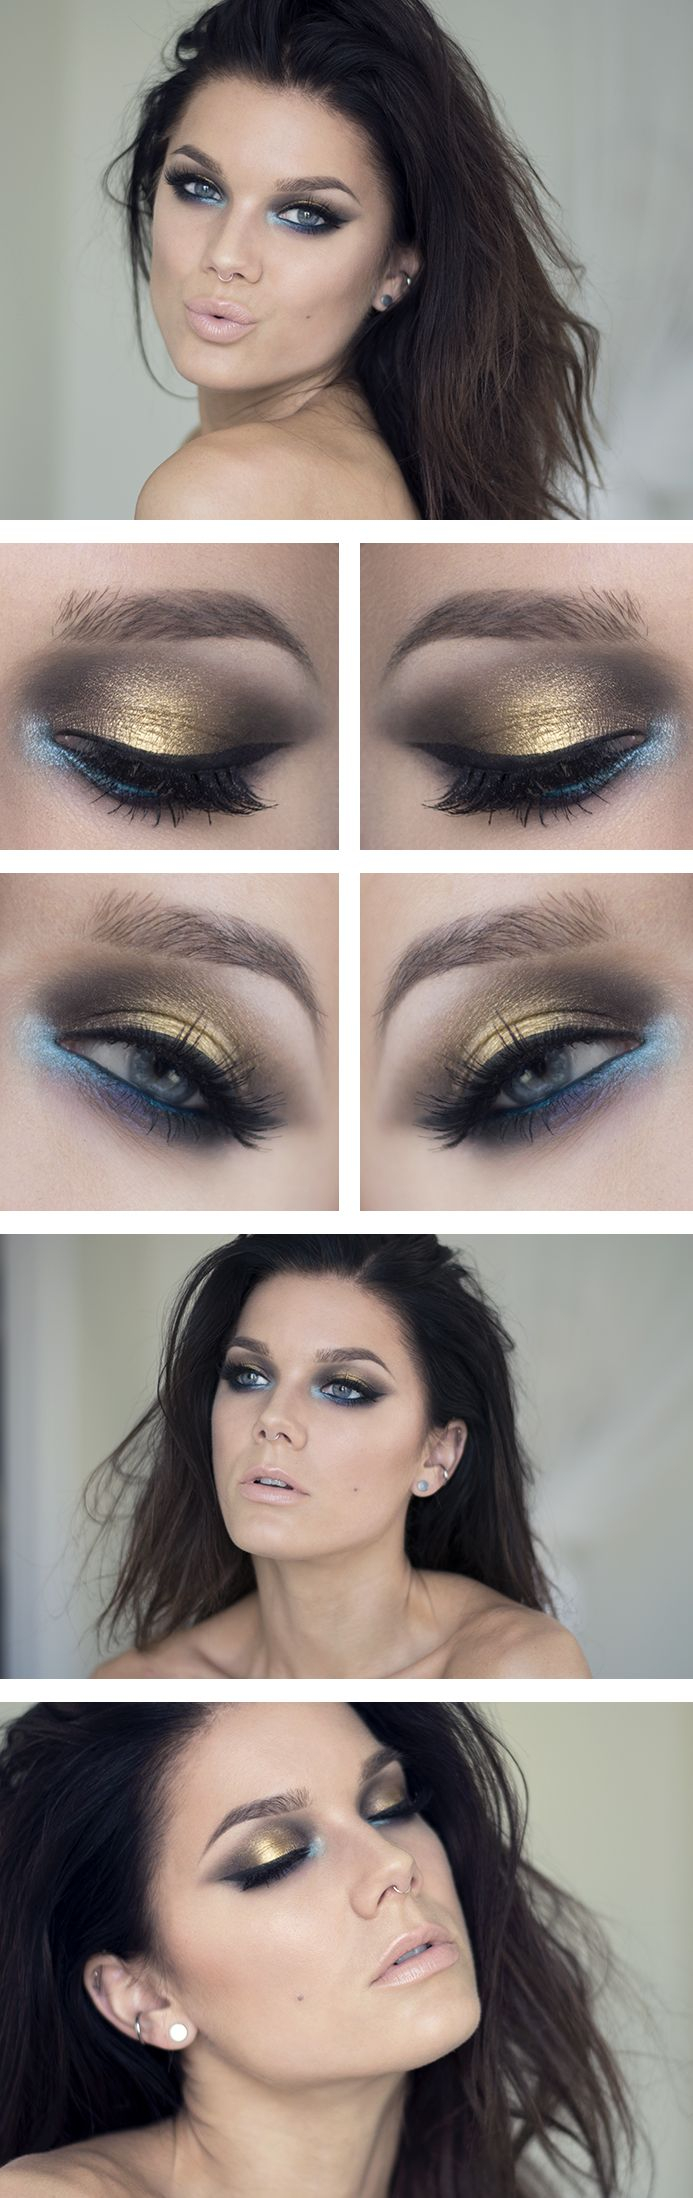 Golden Eye Makeup 12 Gorgeous Blue And Gold Eye Makeup Looks And Tutorials Pretty